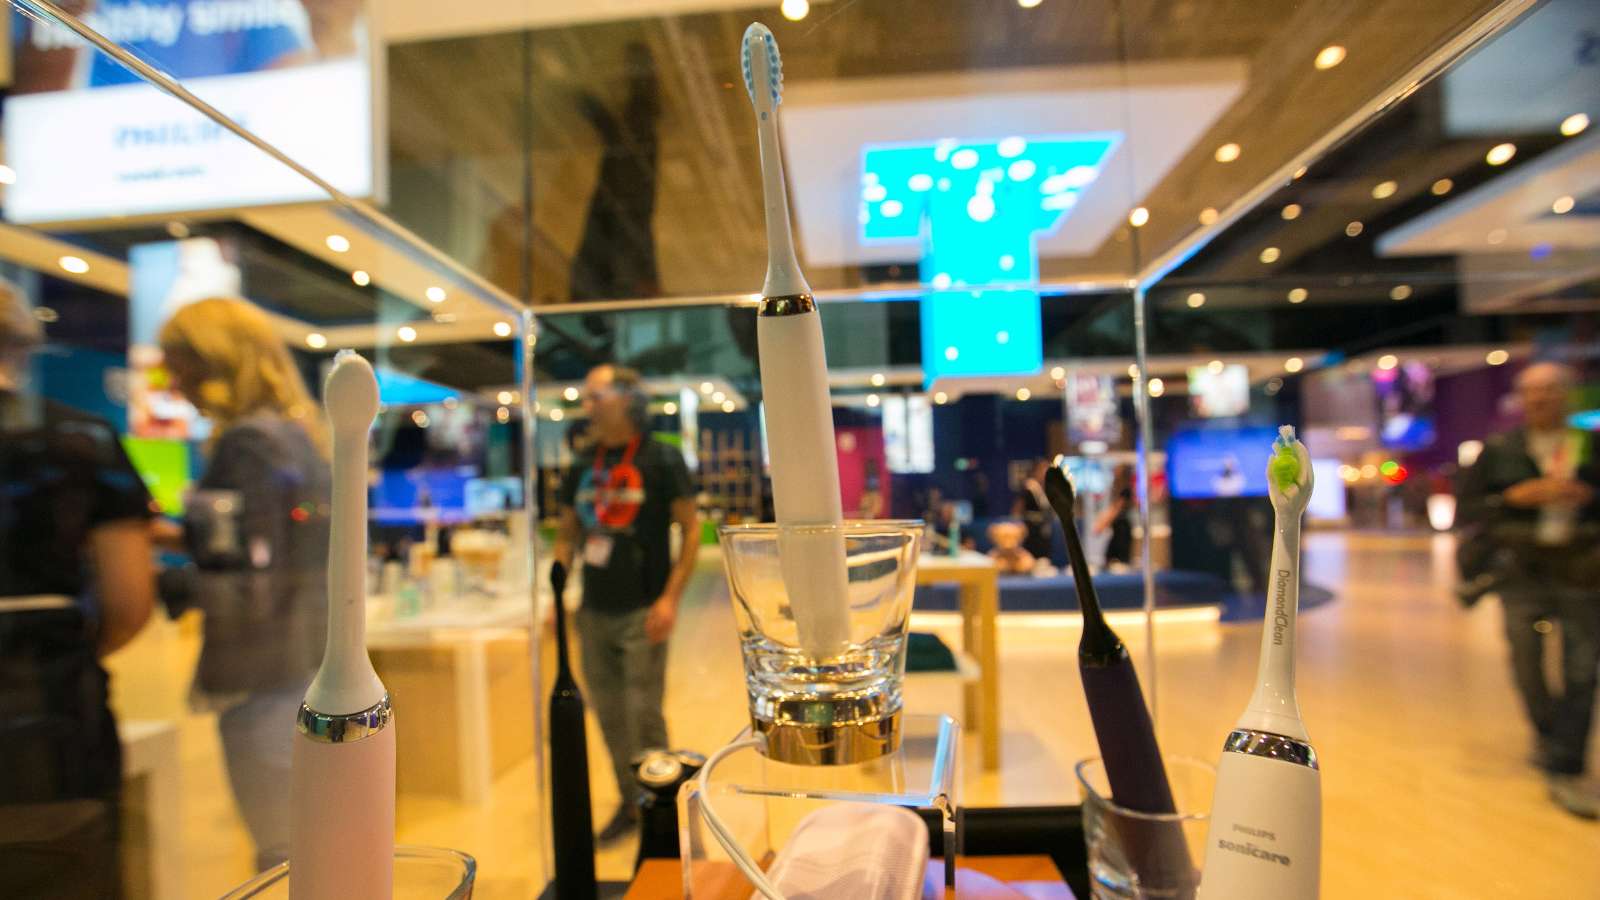 Sonicare electric toothbrushes are on display at the Royal Philips Electronics NV show